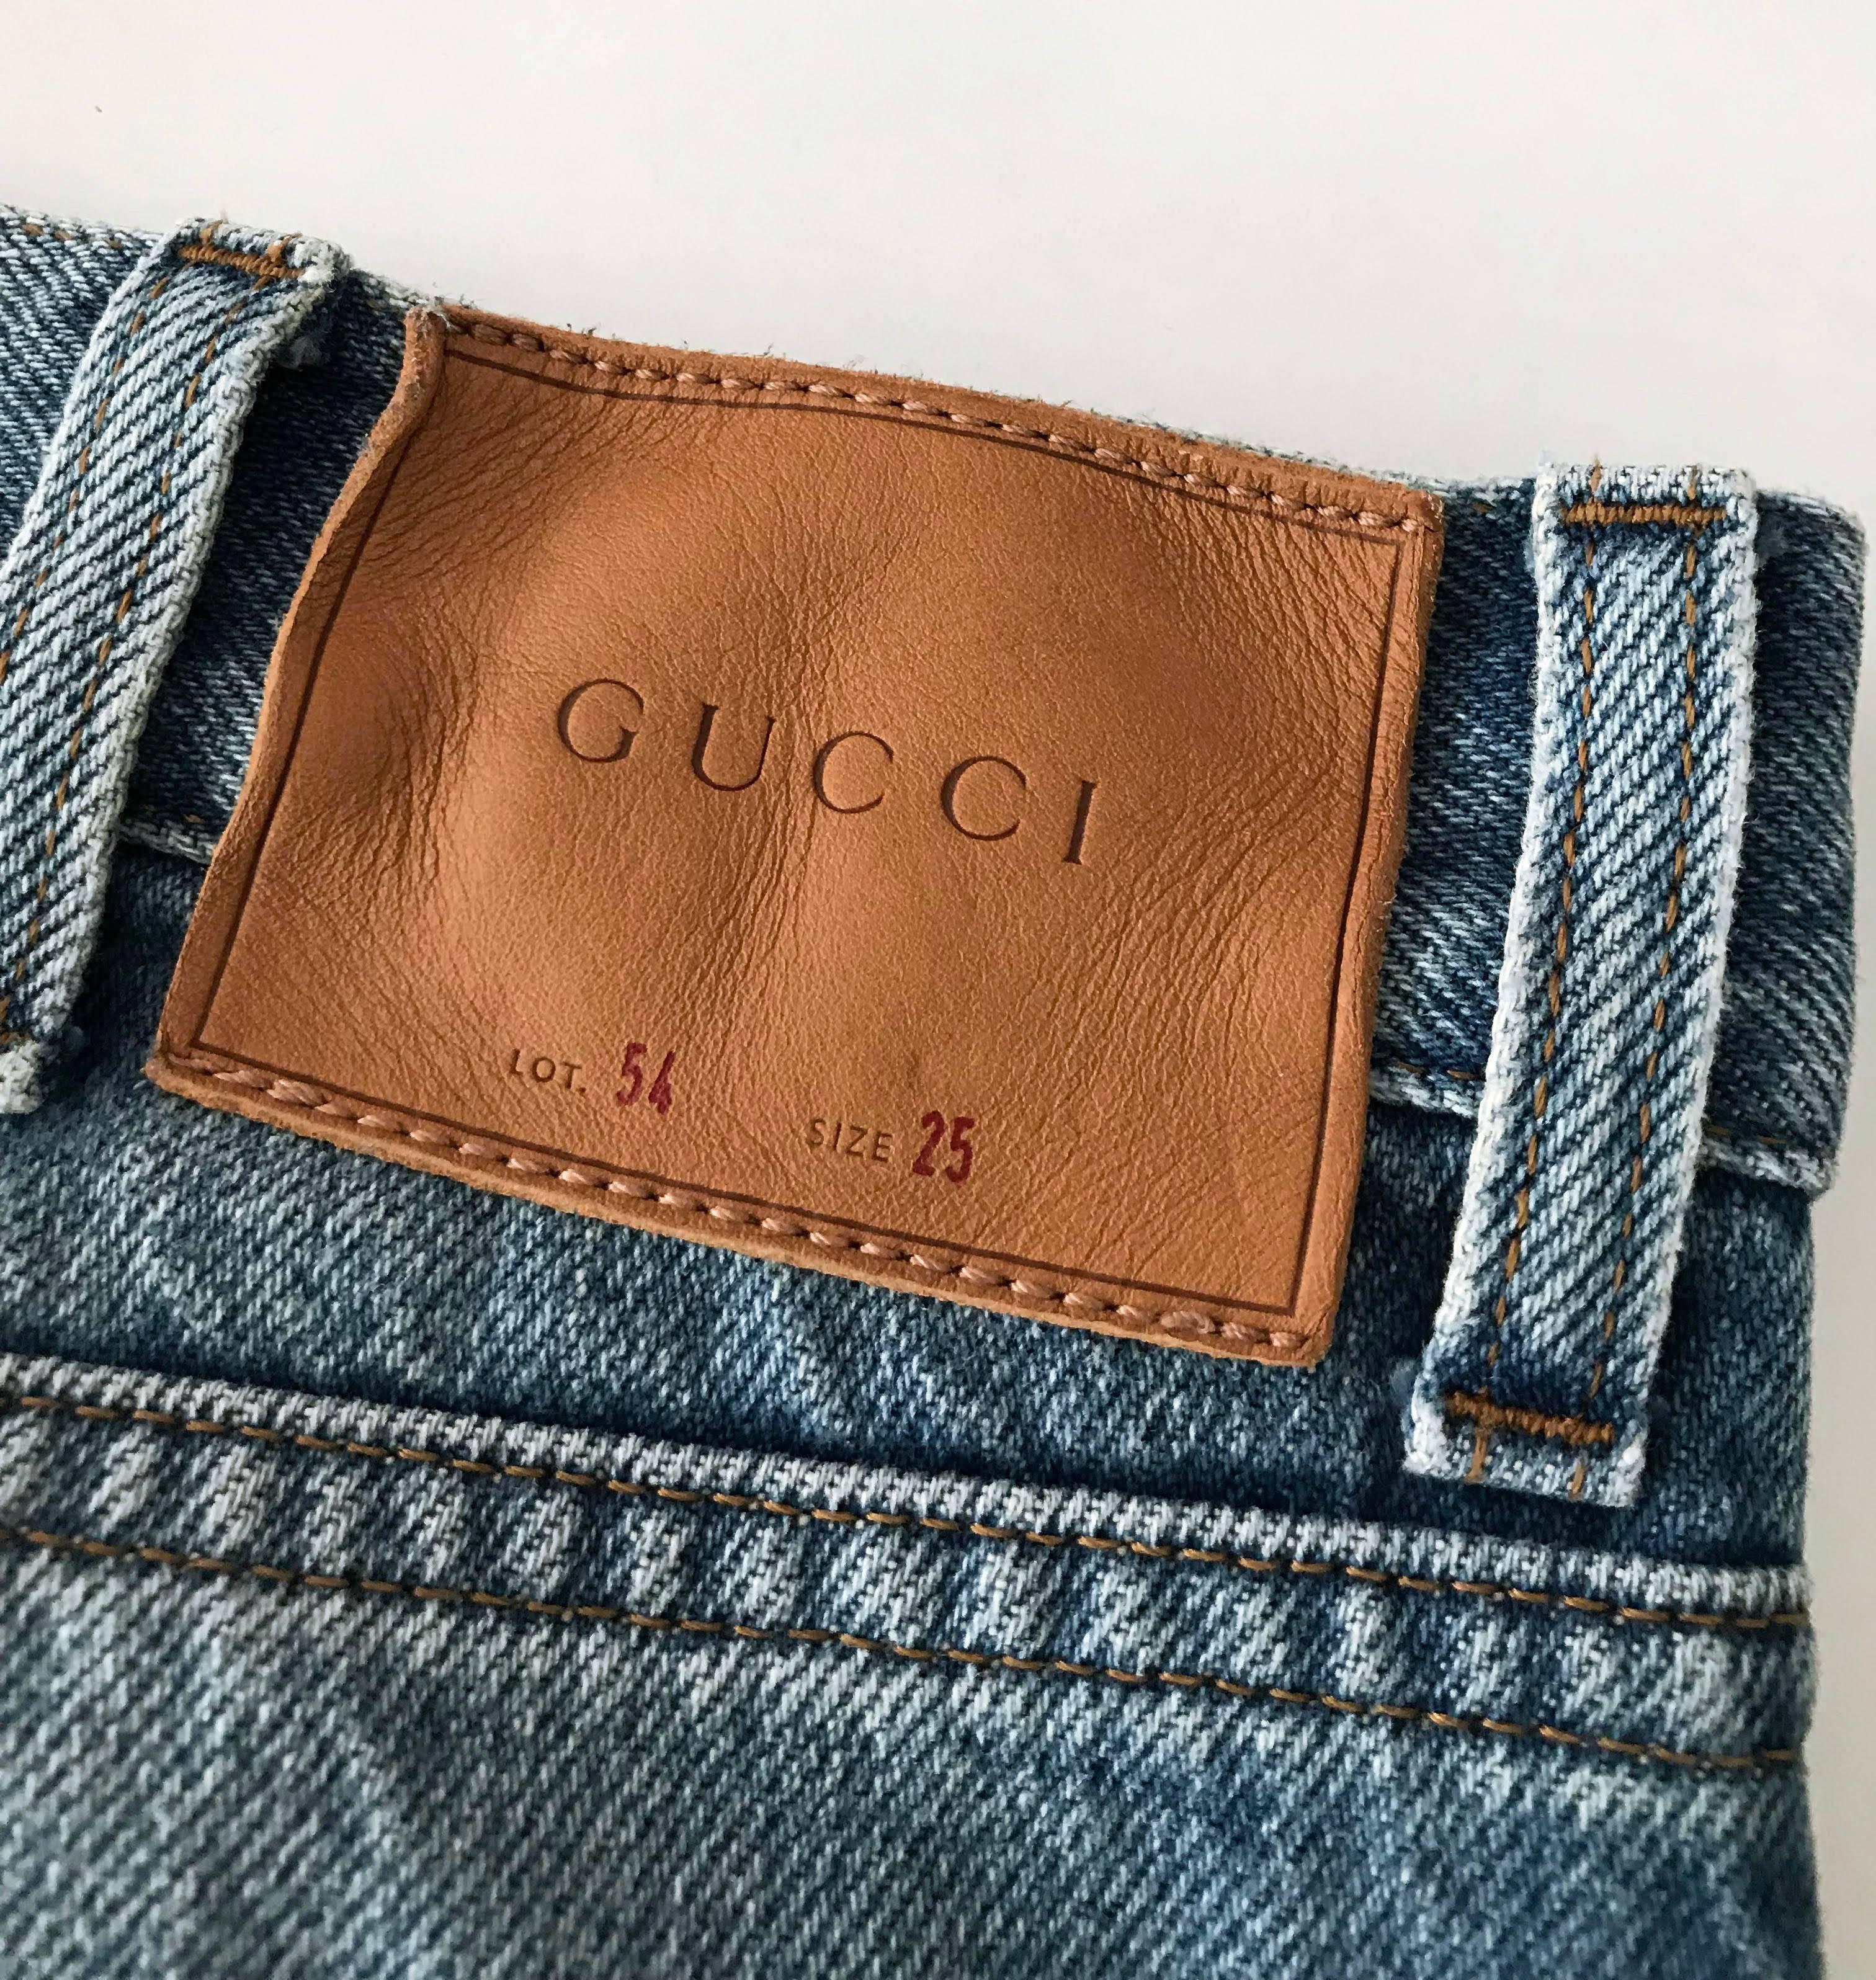 Women's Gucci Alessandro Michele Butterfly Patch Blue Denim jeans - size 25